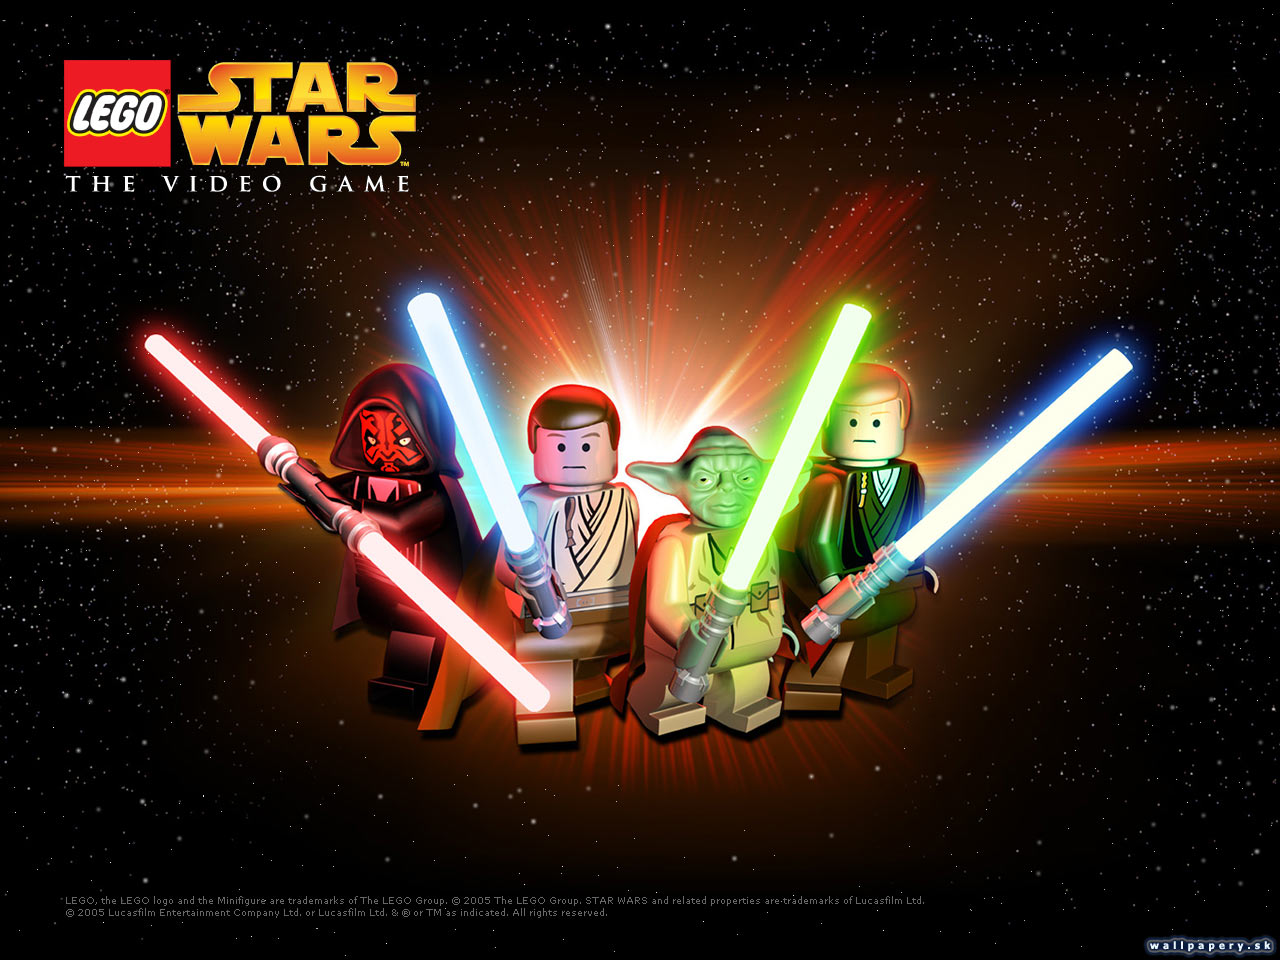 LEGO Star Wars: The Video Game - wallpaper 1